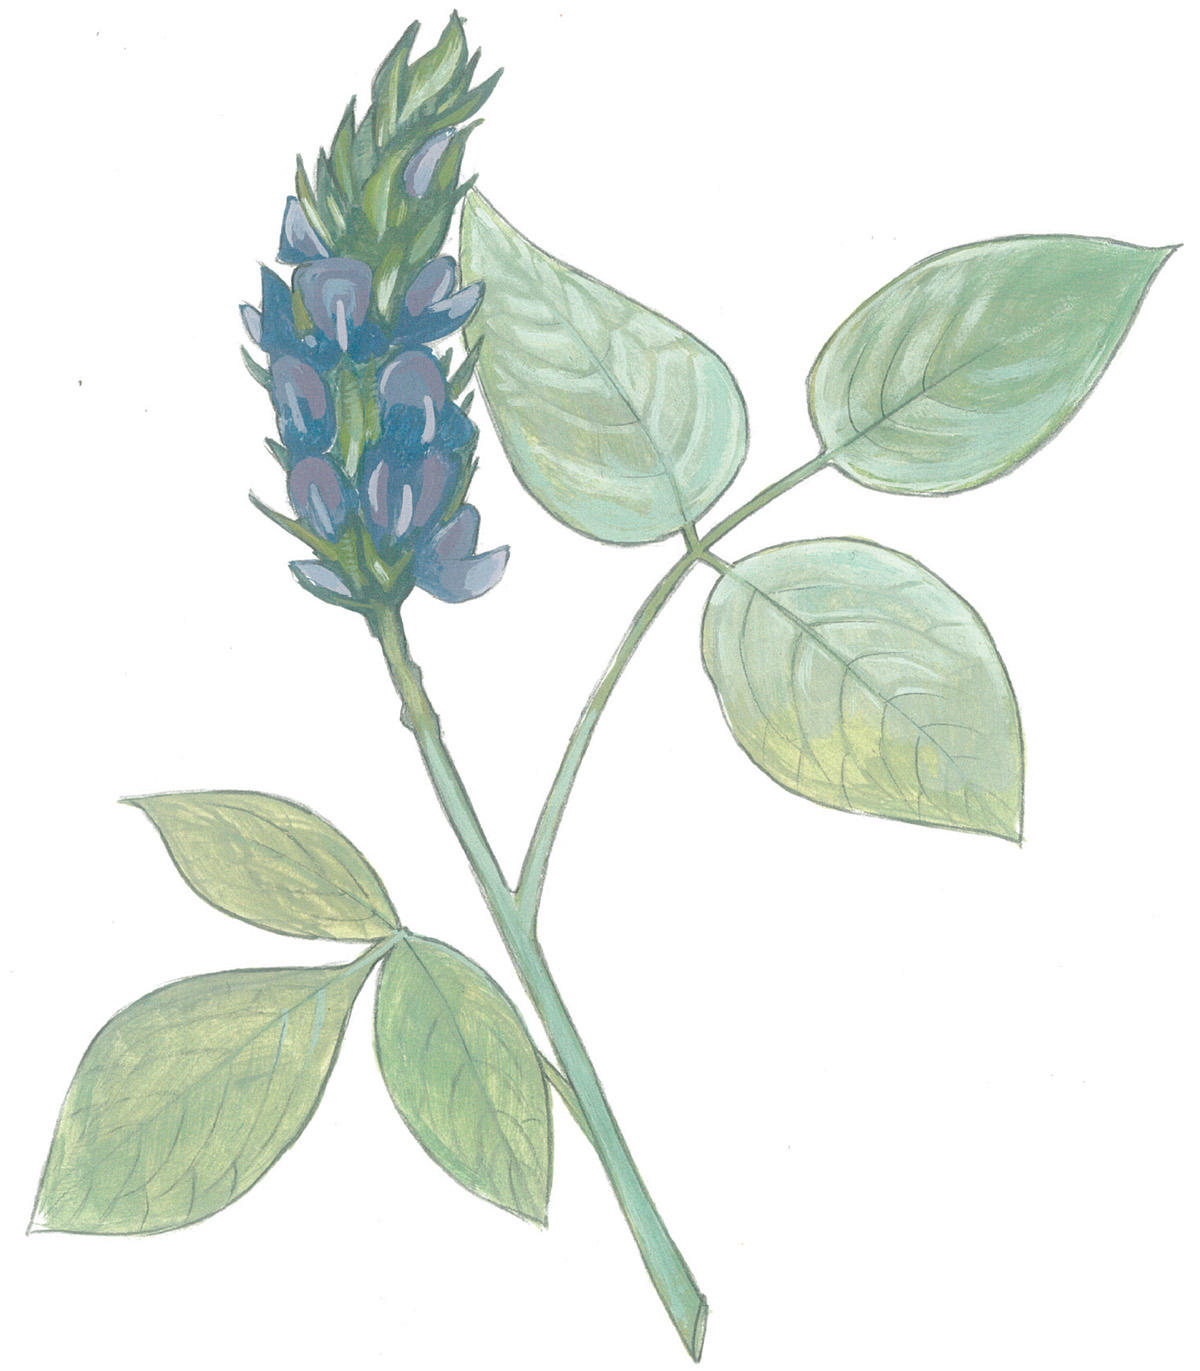 Illustration of leather root plant by Grey Arena.